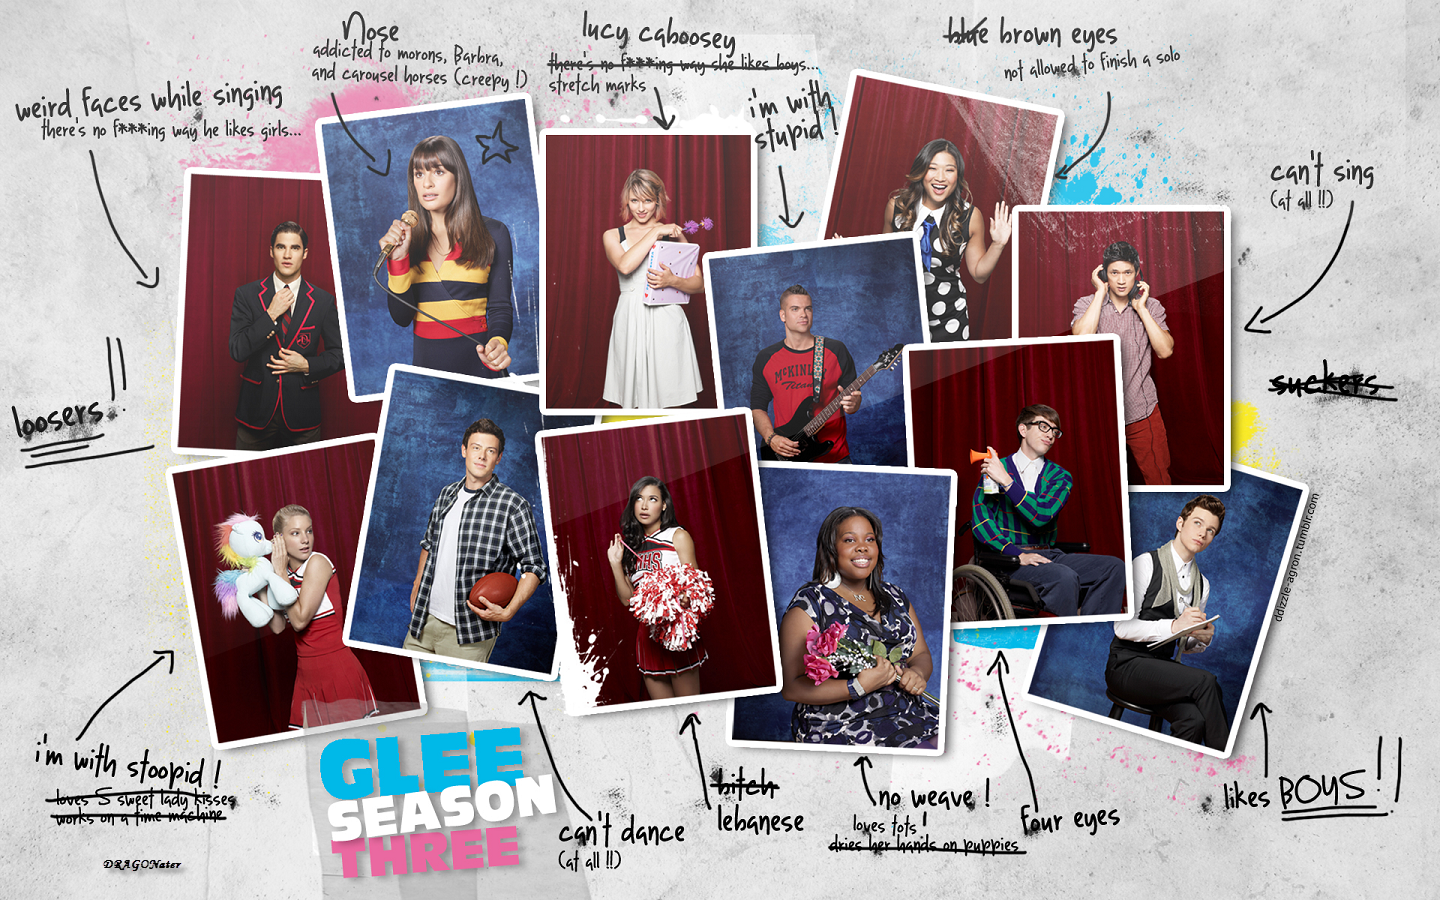 Image Glee Cast Season Pc Android iPhone And iPad Wallpaper